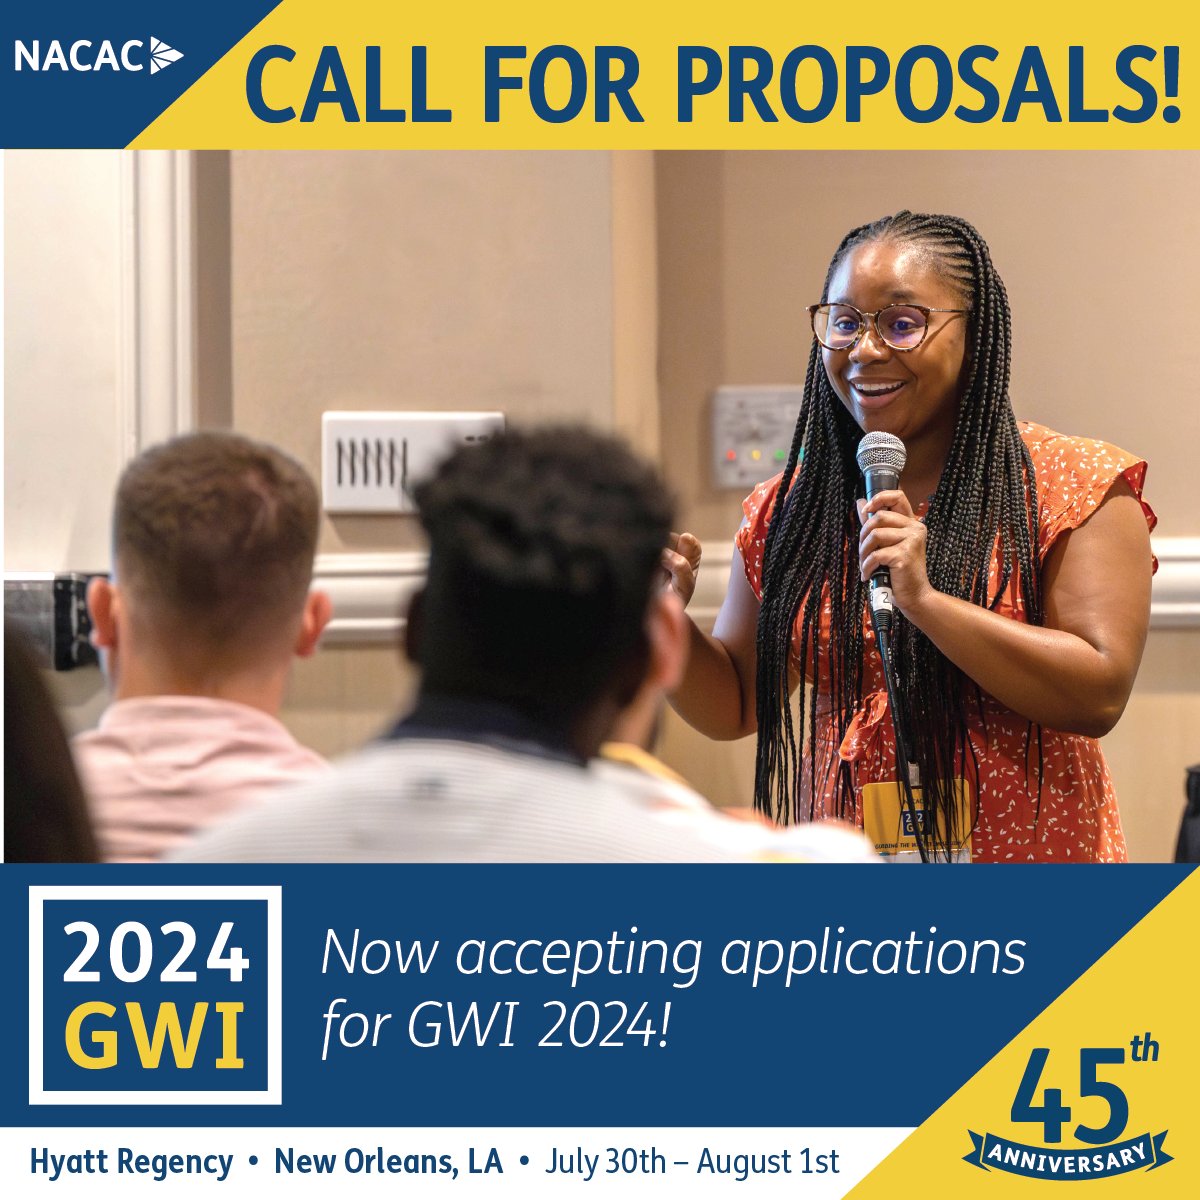 #GWI2024 Are you interested in presenting at NACAC's Guiding the Way to #Inclusion conference this year? Submit your education session proposal. ow.ly/MQ0c50QiMPF #equity #collgeaccess